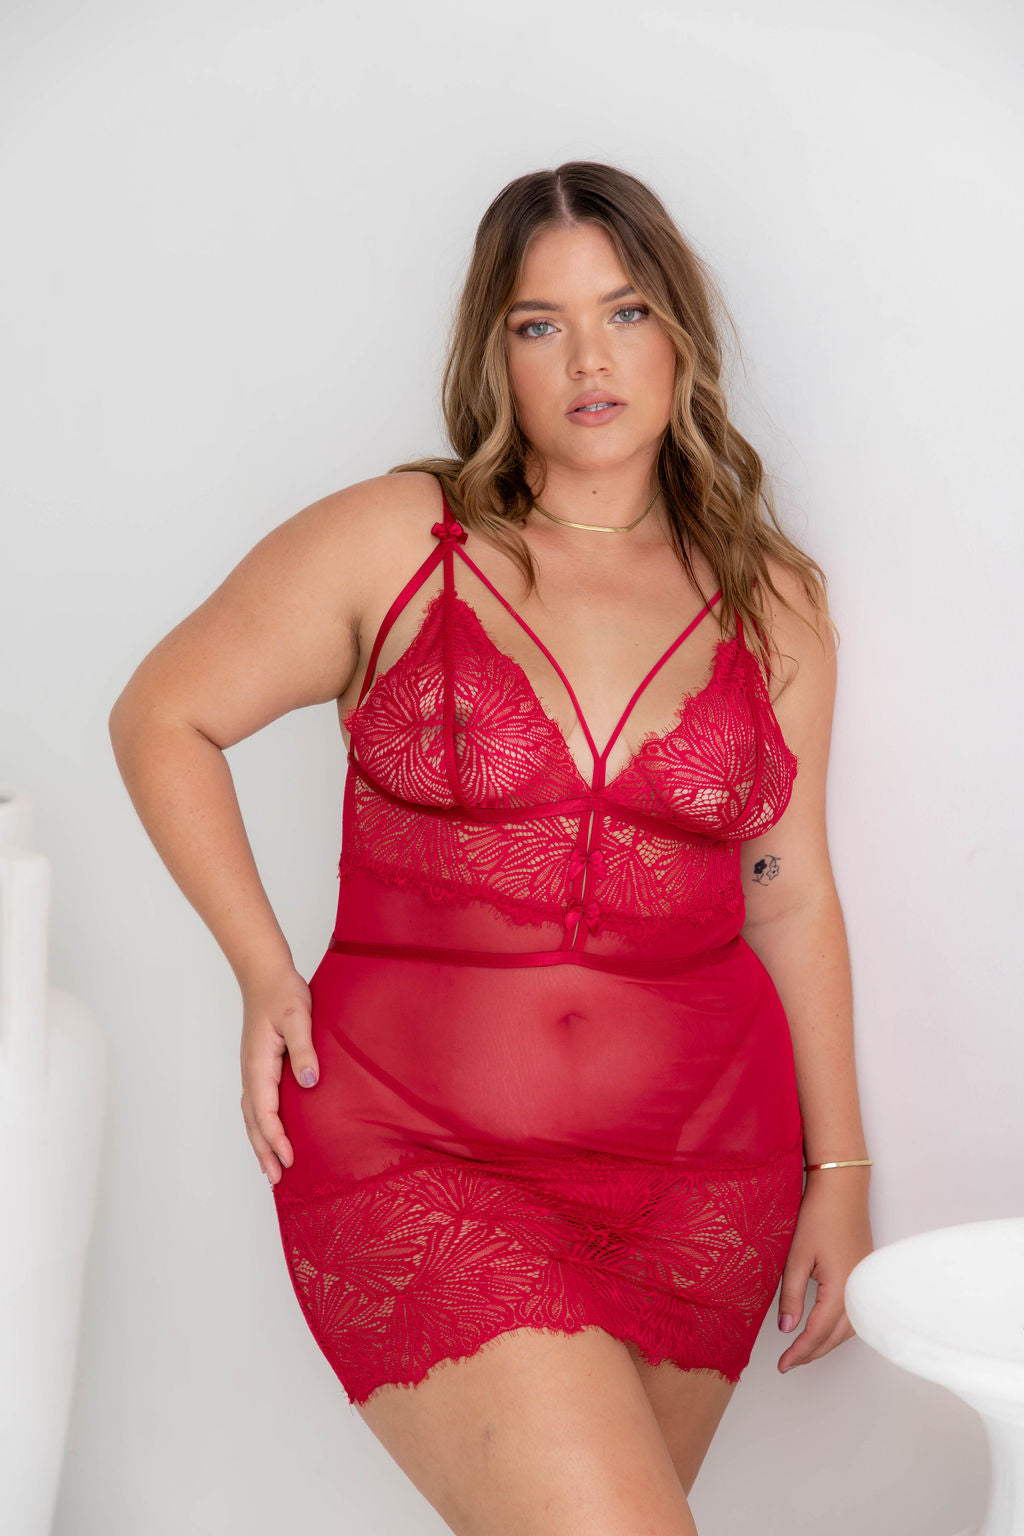 Marbella Red Lace Chemise - $66.00 - Babydoll - Naked Curve